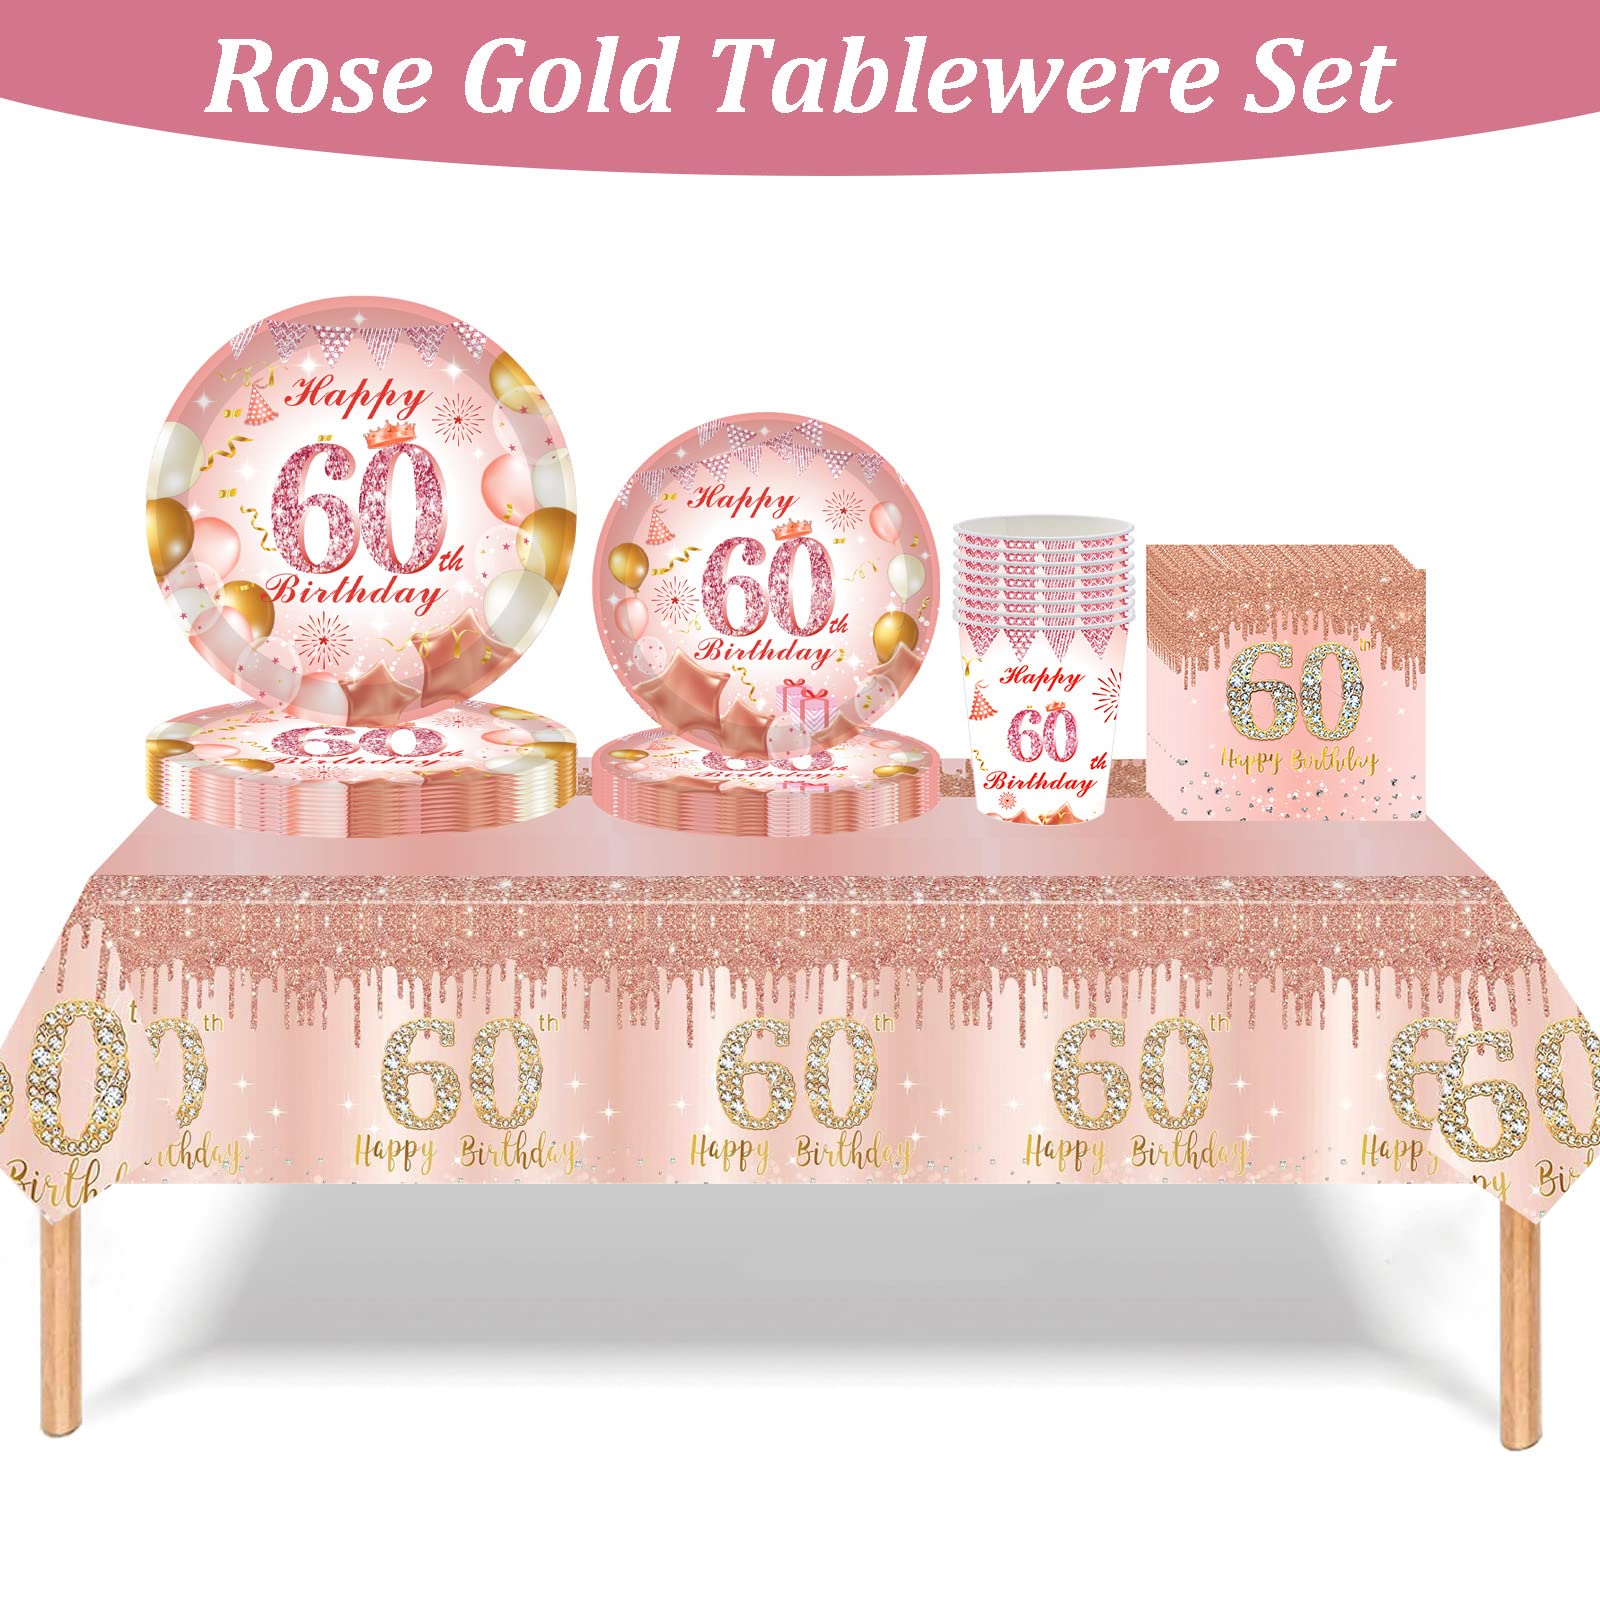 137*274cm Large 60th Rose Gold Table Cloth,60th Birthday Decorations for Her,Rose Gold 60th Birthday Party Plastic Disposable Table Cloth Tablecover for Her Birthday Gifts,60th Birthday Party Supplies